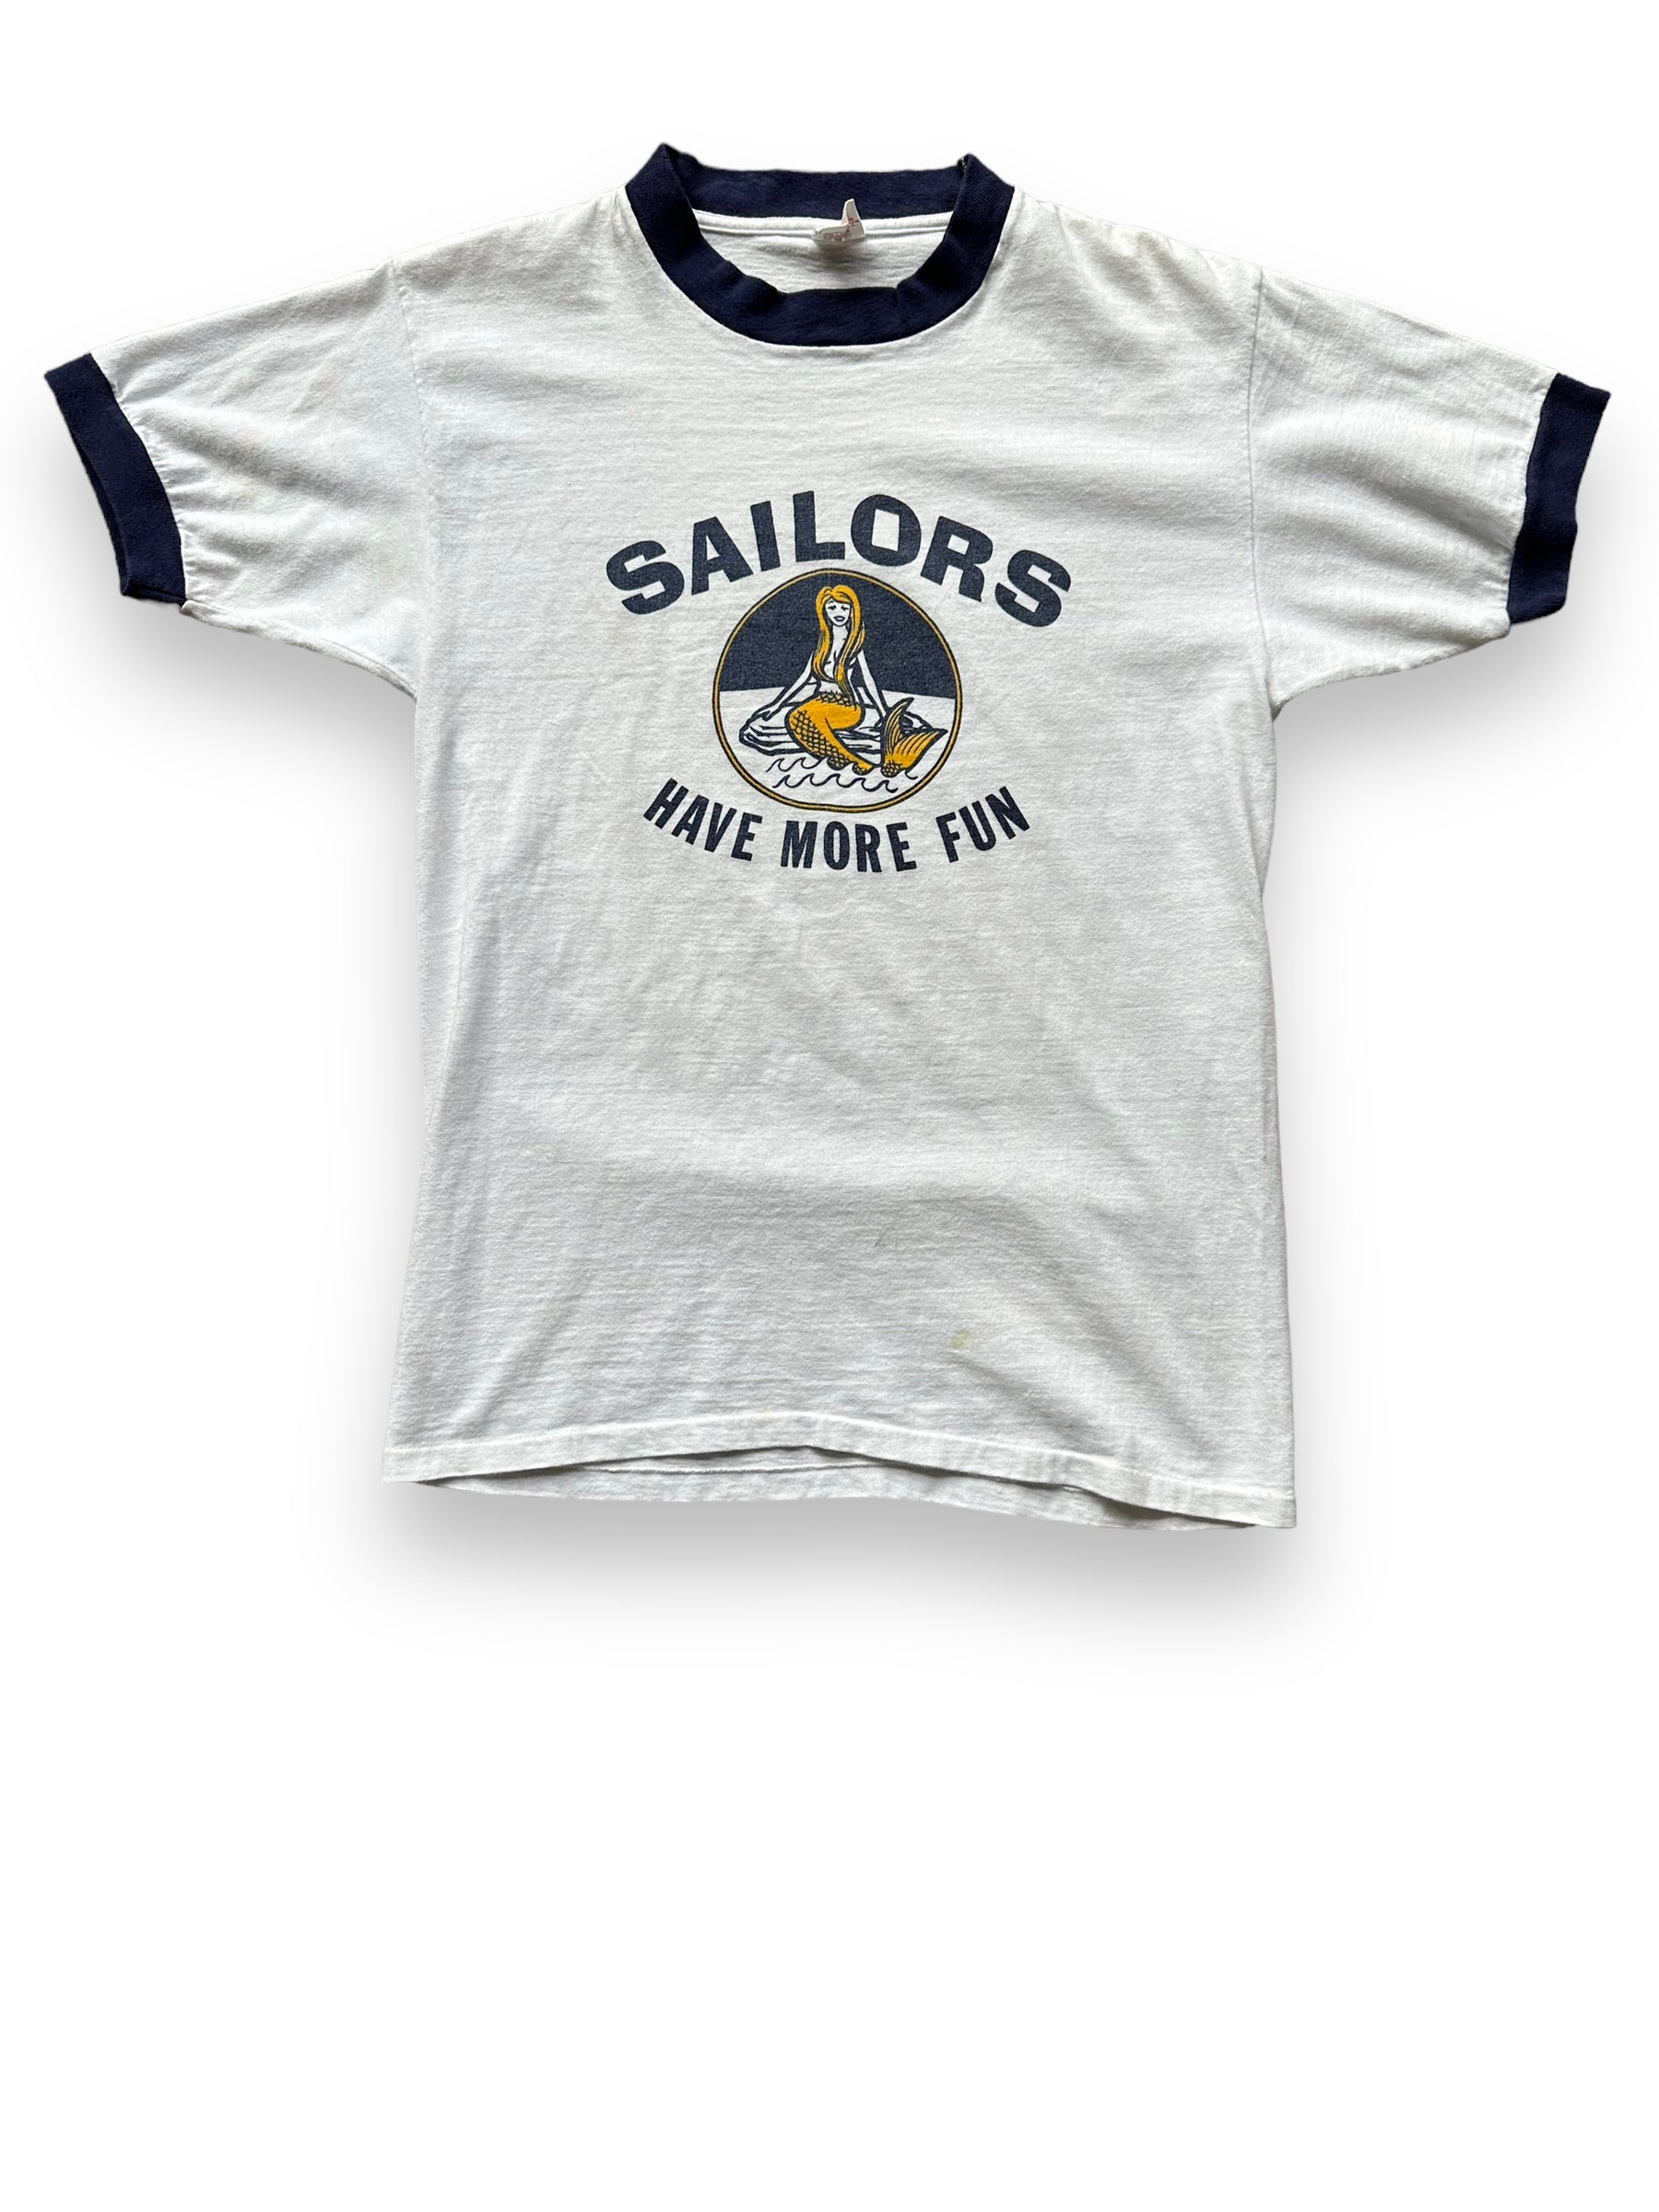 Front View of Vintage Sailors Have More Fun Ringer Tee SZ M | Vintage T-Shirts Seattle | Barn Owl Vintage Tees Seattle